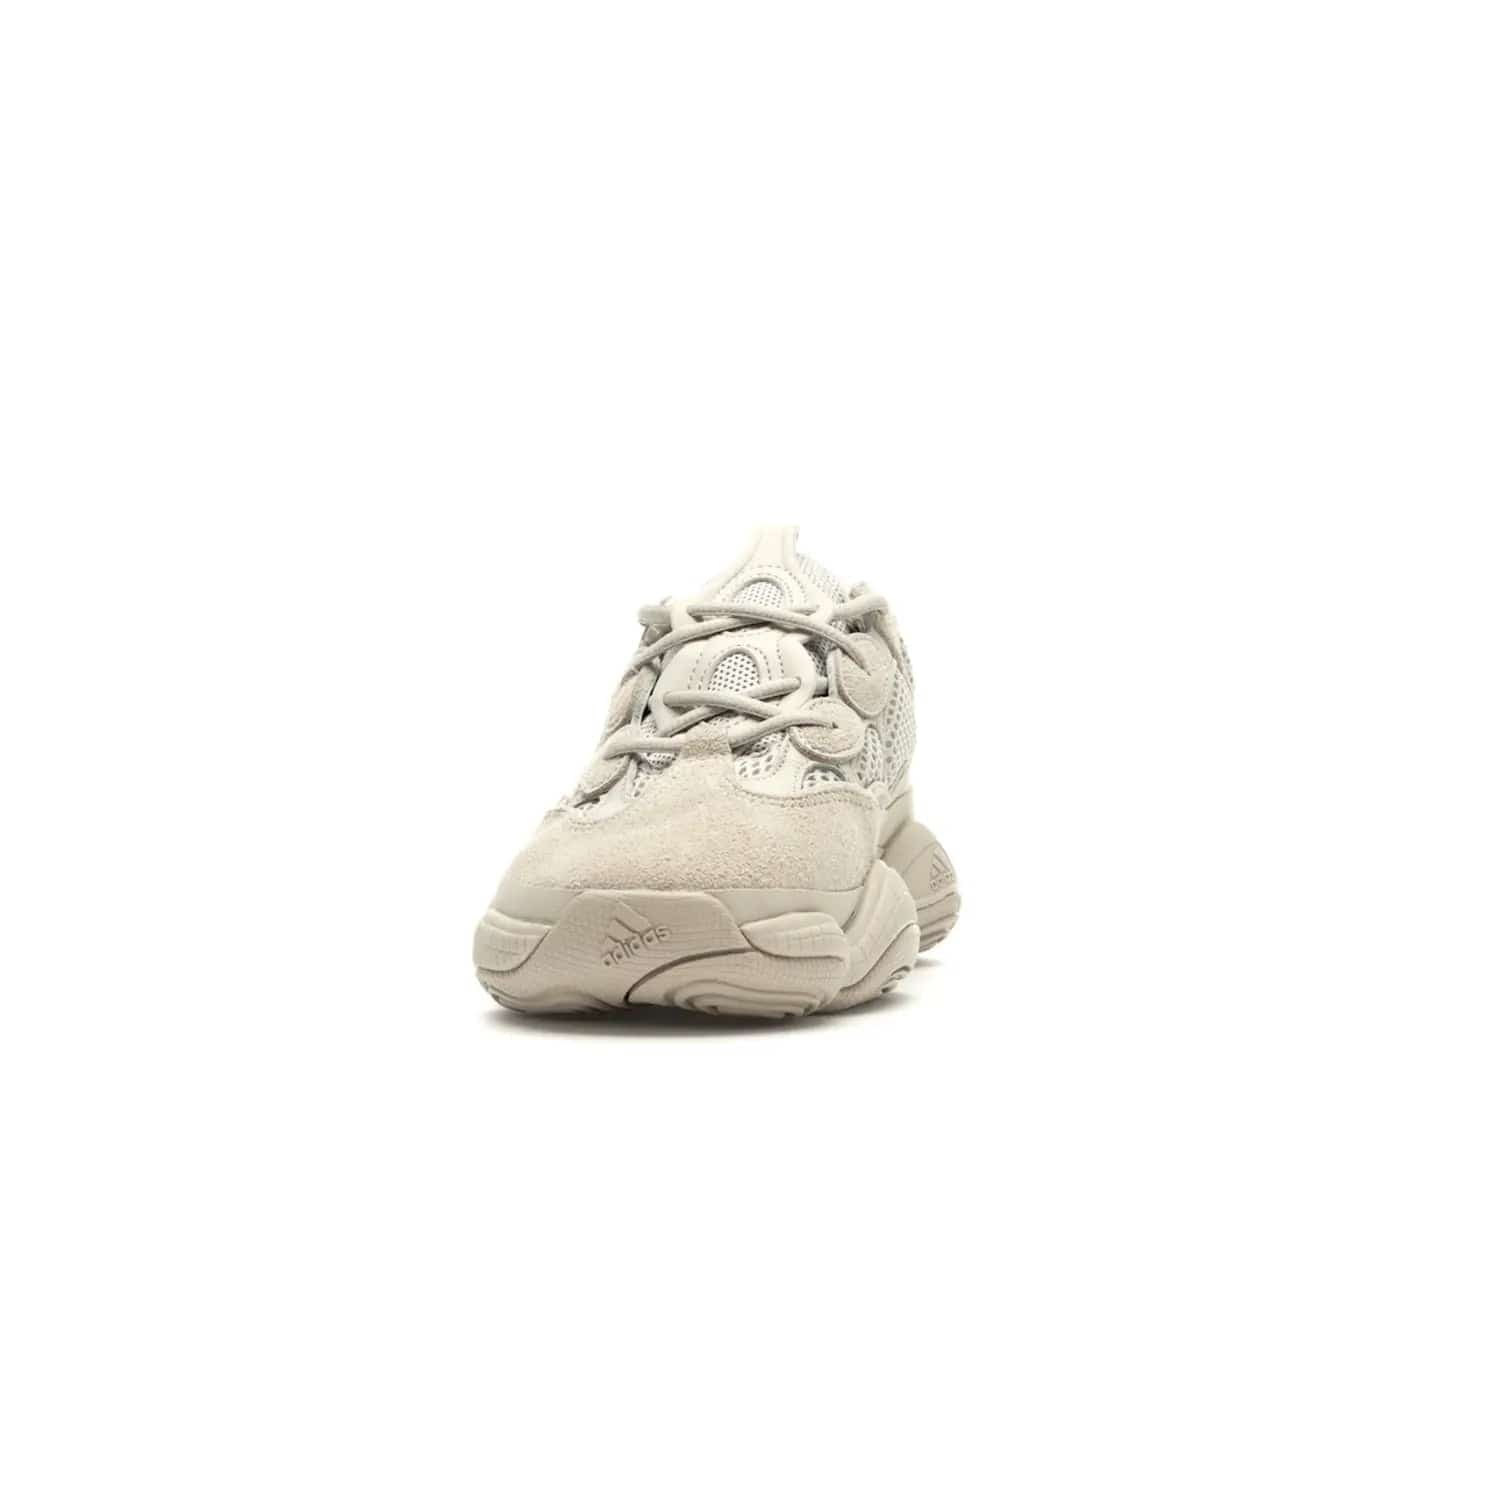 adidas Yeezy 500 Blush - Image 11 - Only at www.BallersClubKickz.com - Step up your sneaker game with the Adidas Yeezy 500 Blush. Monochromatic pale pink palette, hiking-inspired suede/mesh construction, plus adiPRENE sole for comfort and performance. Get the Adidas Yeezy 500 and experience true style and comfort.